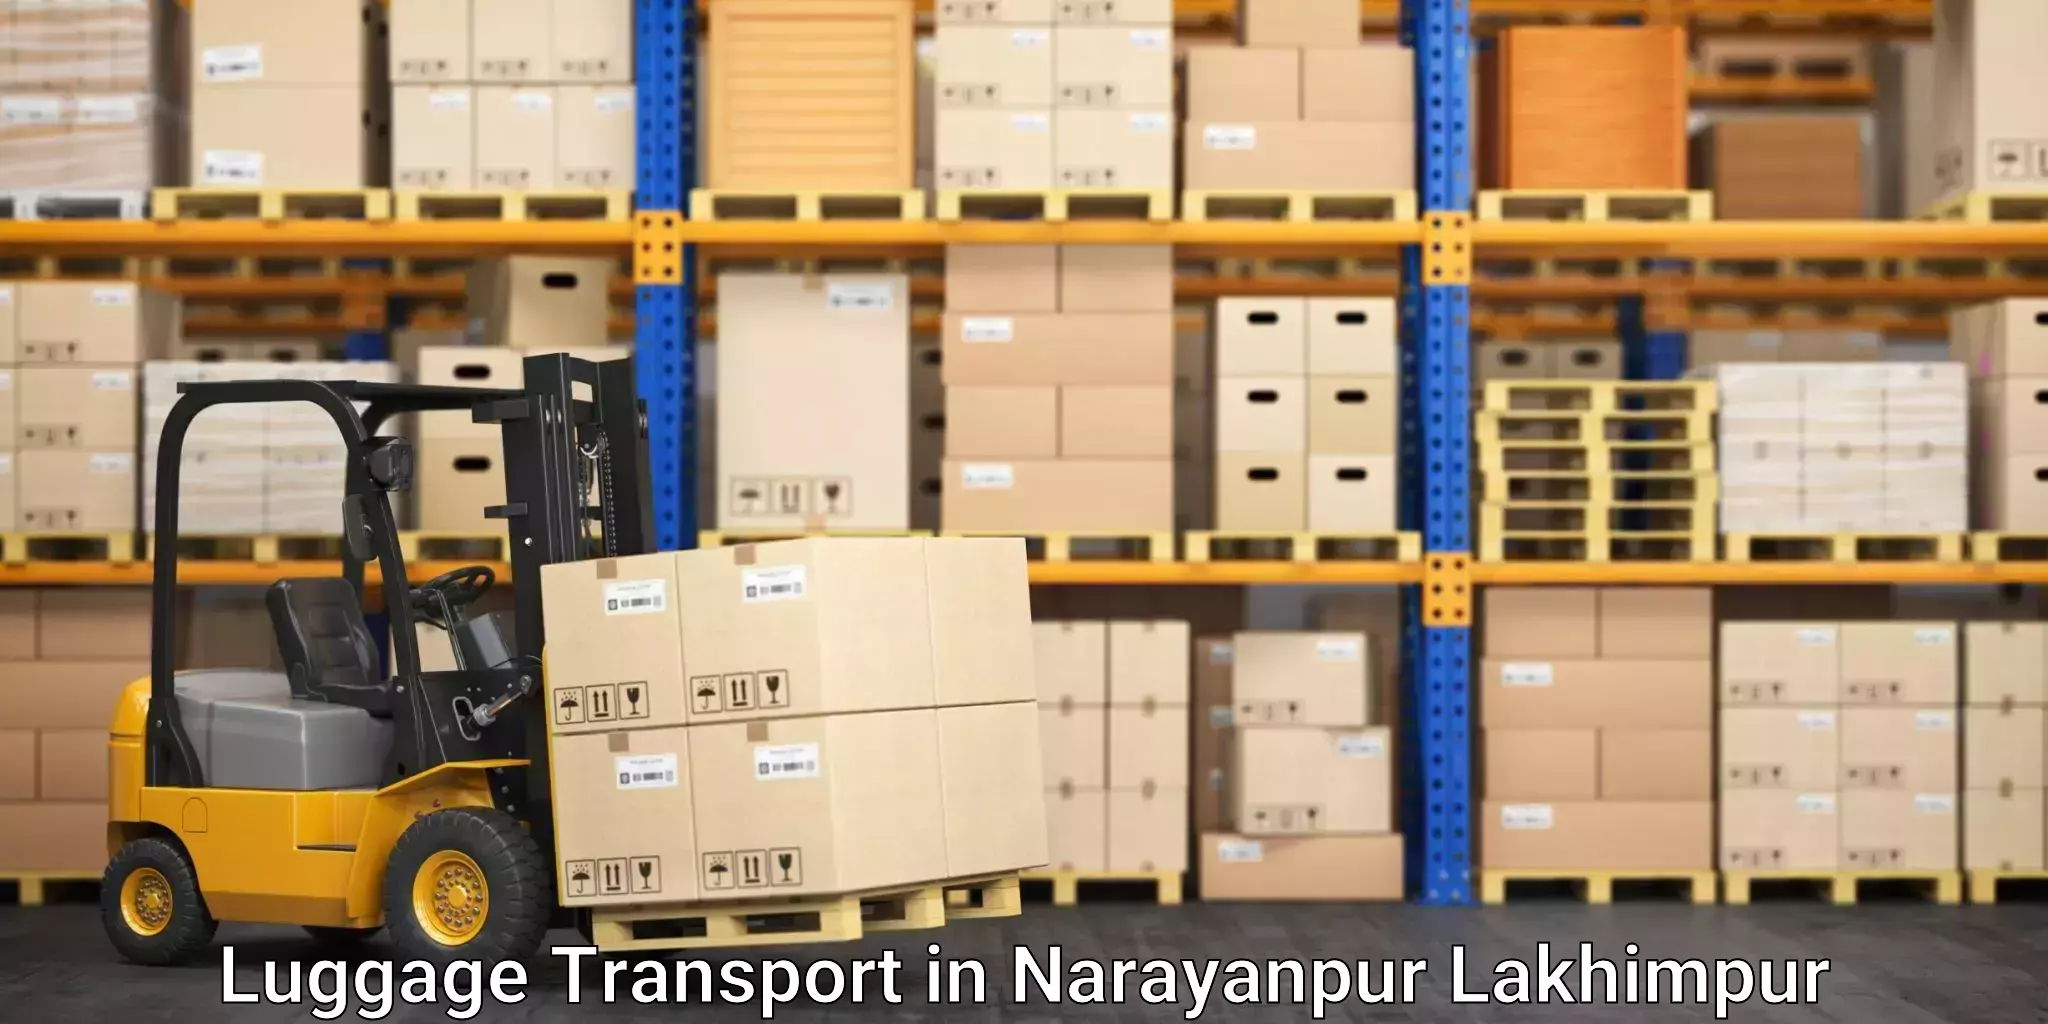 Automated luggage transport in Narayanpur Lakhimpur